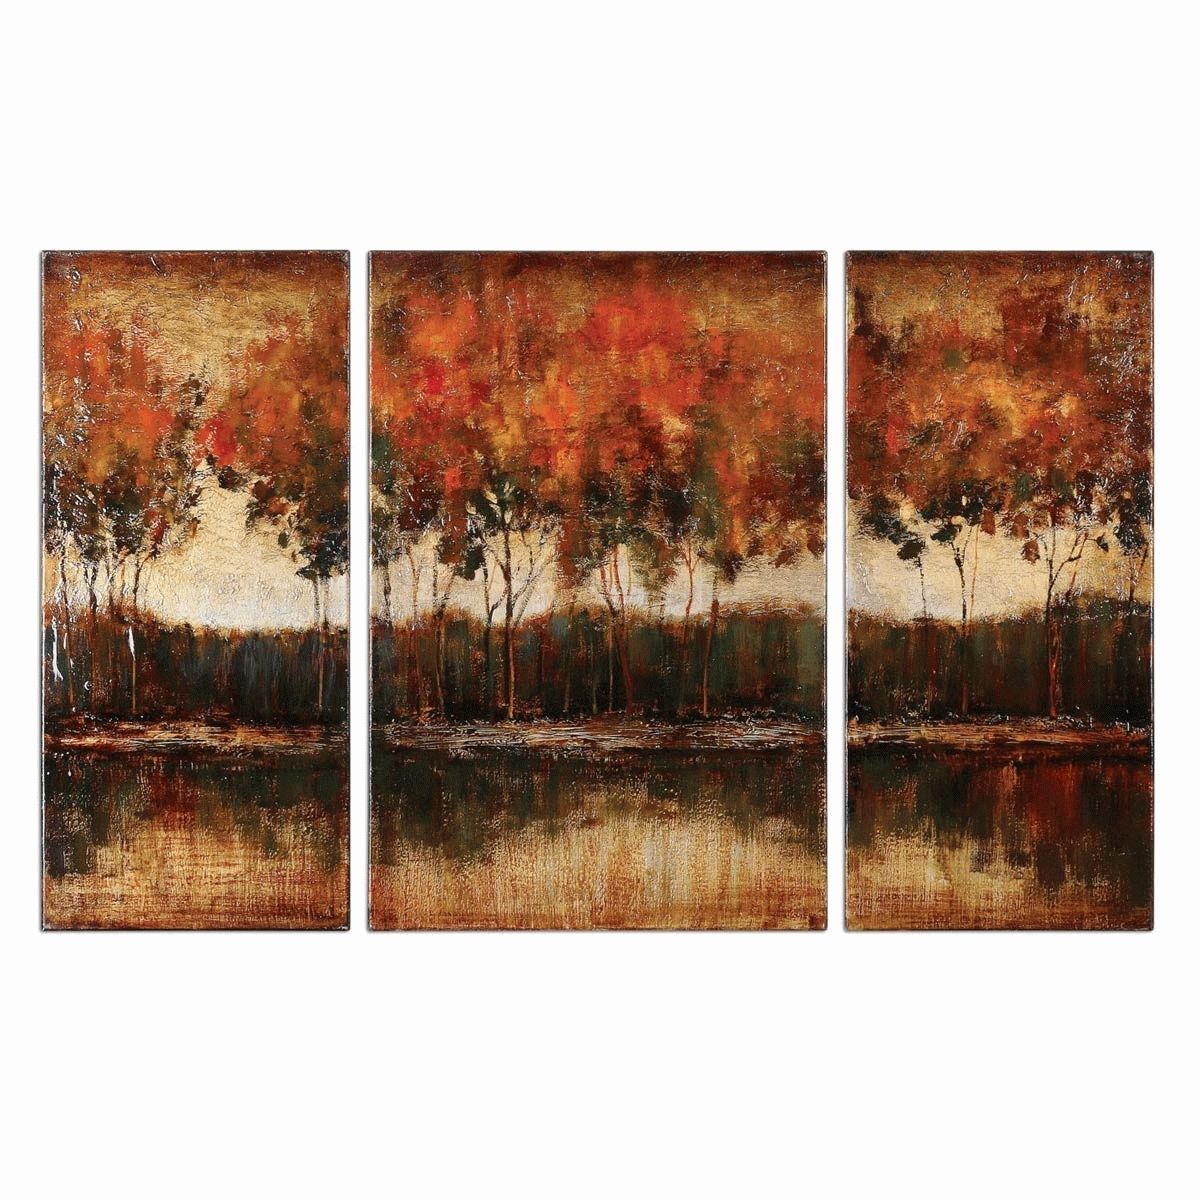 Canvas Wall Art Sets | Roselawnlutheran Intended For 3 Pc Canvas Wall Art Sets (View 18 of 20)